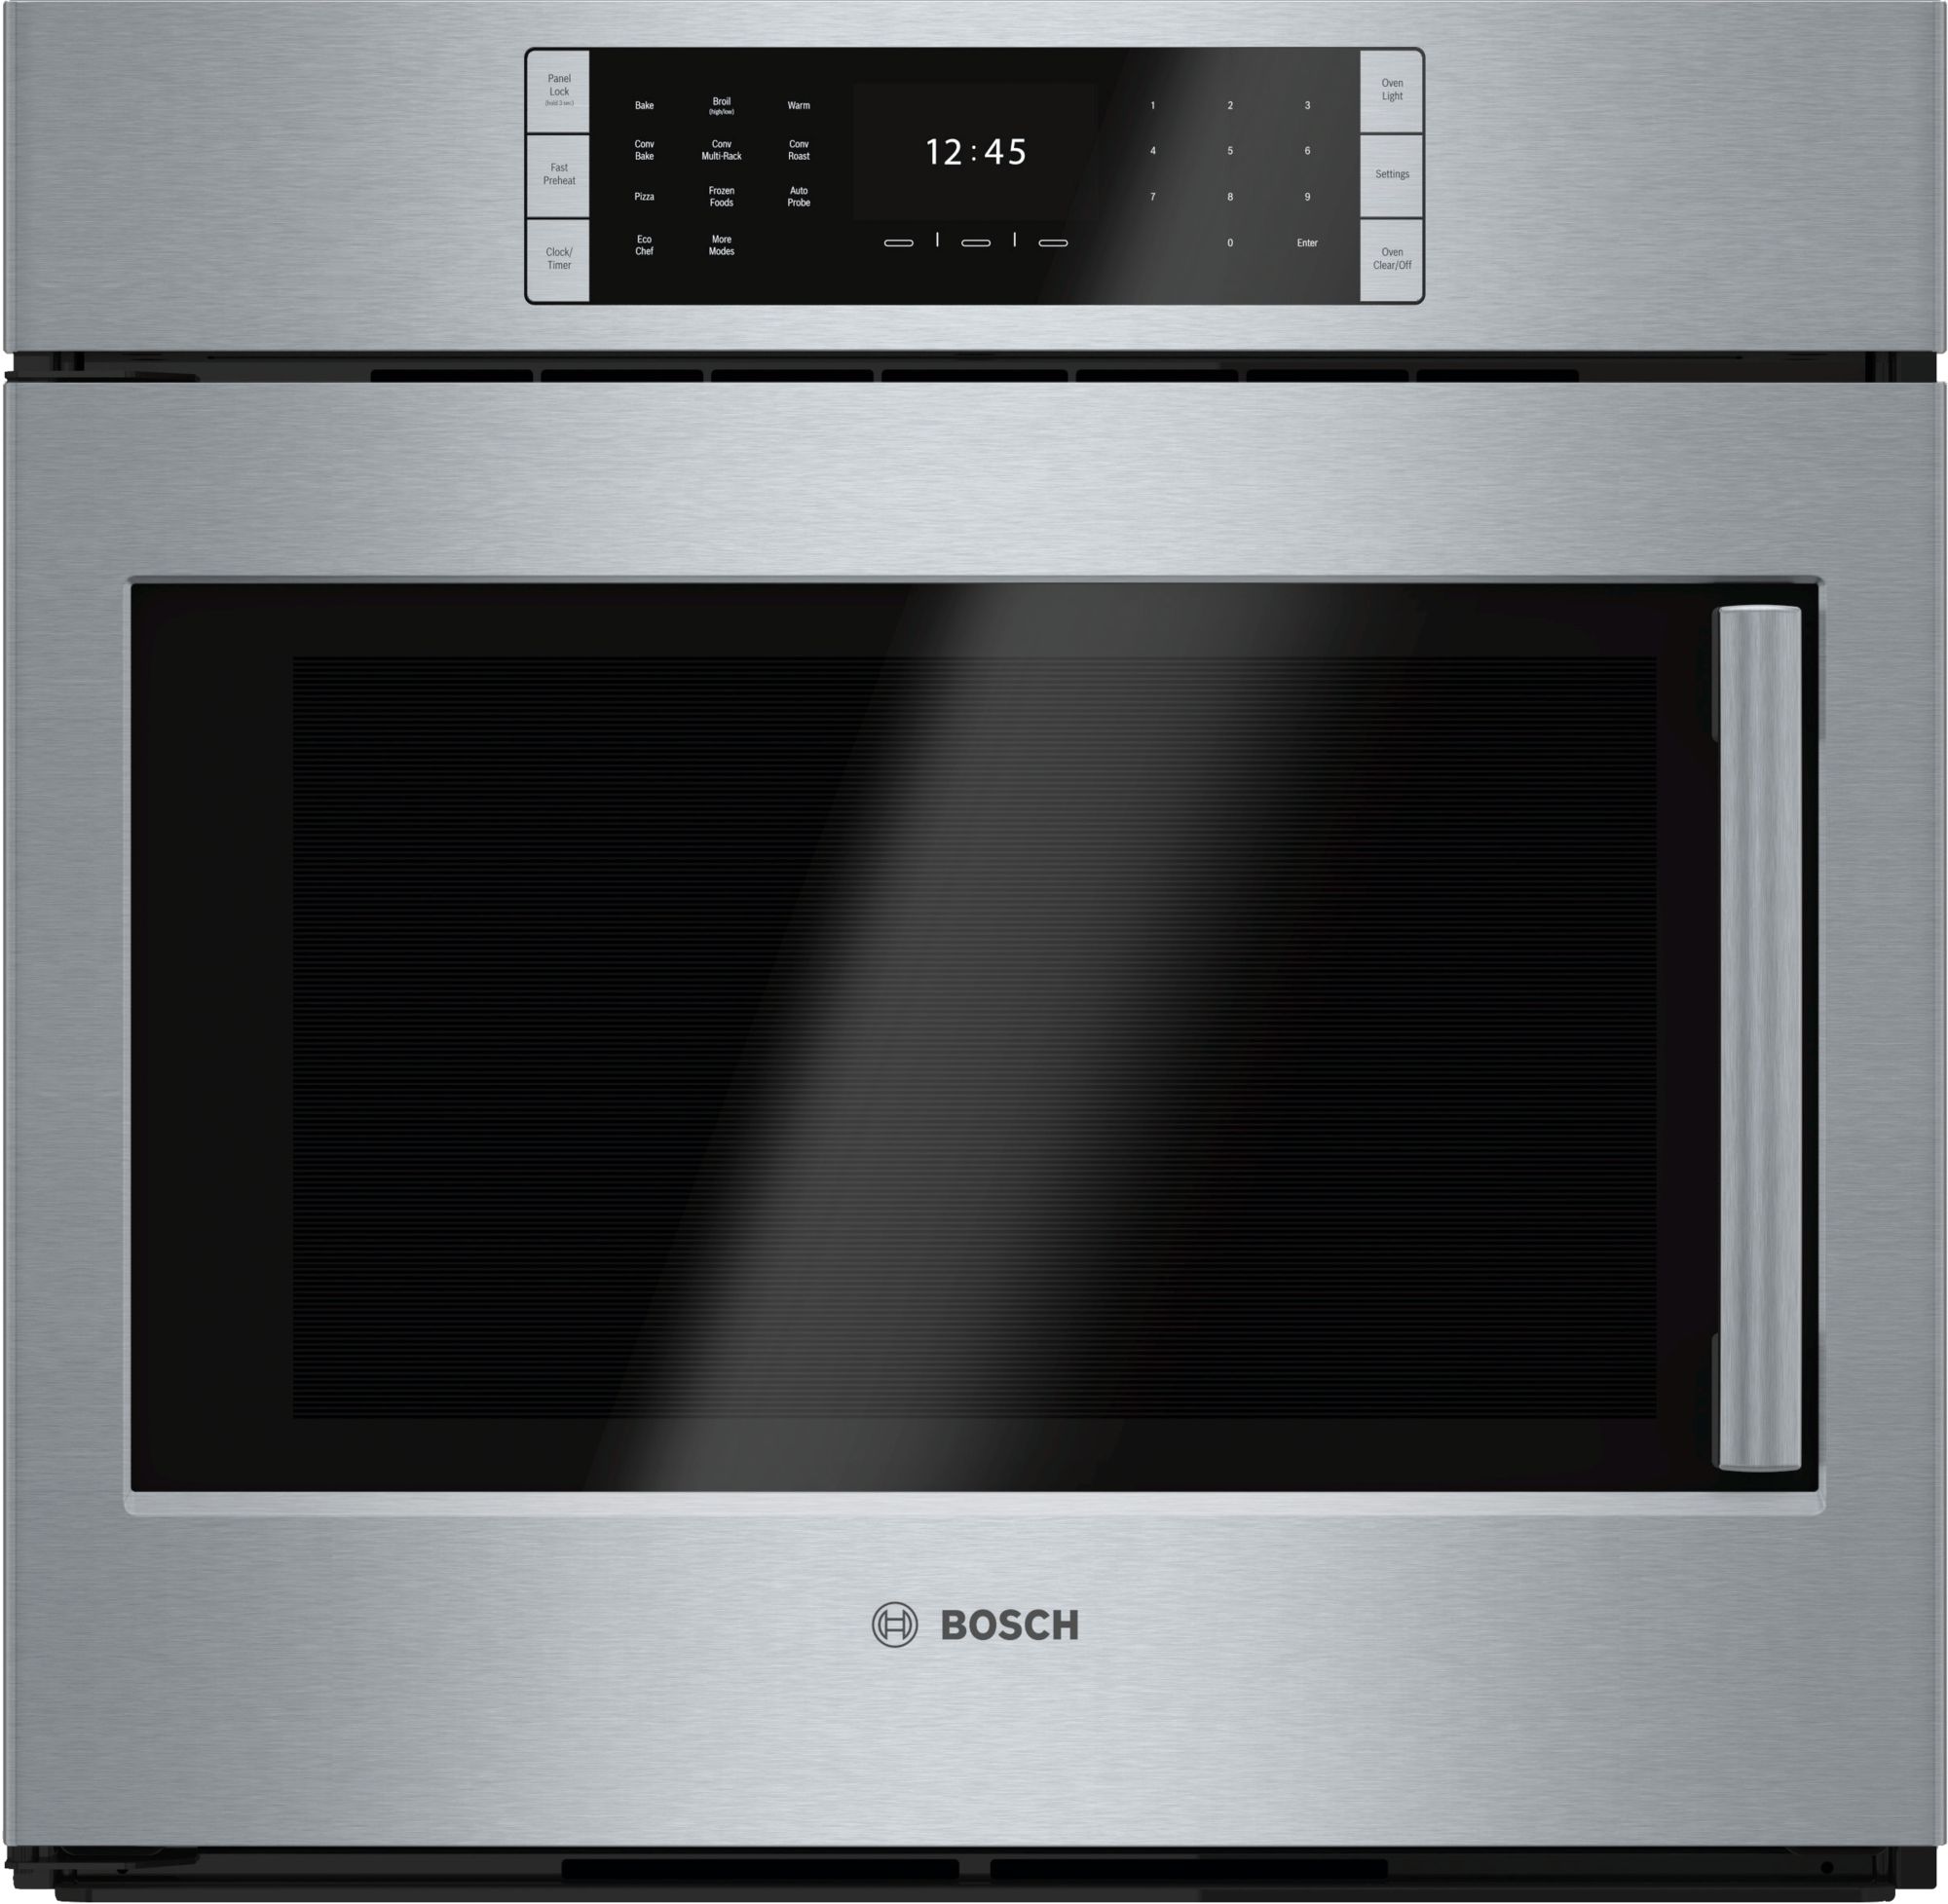 Bosch Benchmark® Series 30" Stainless Steel Electric Built In Single Oven-HBLP451LUC